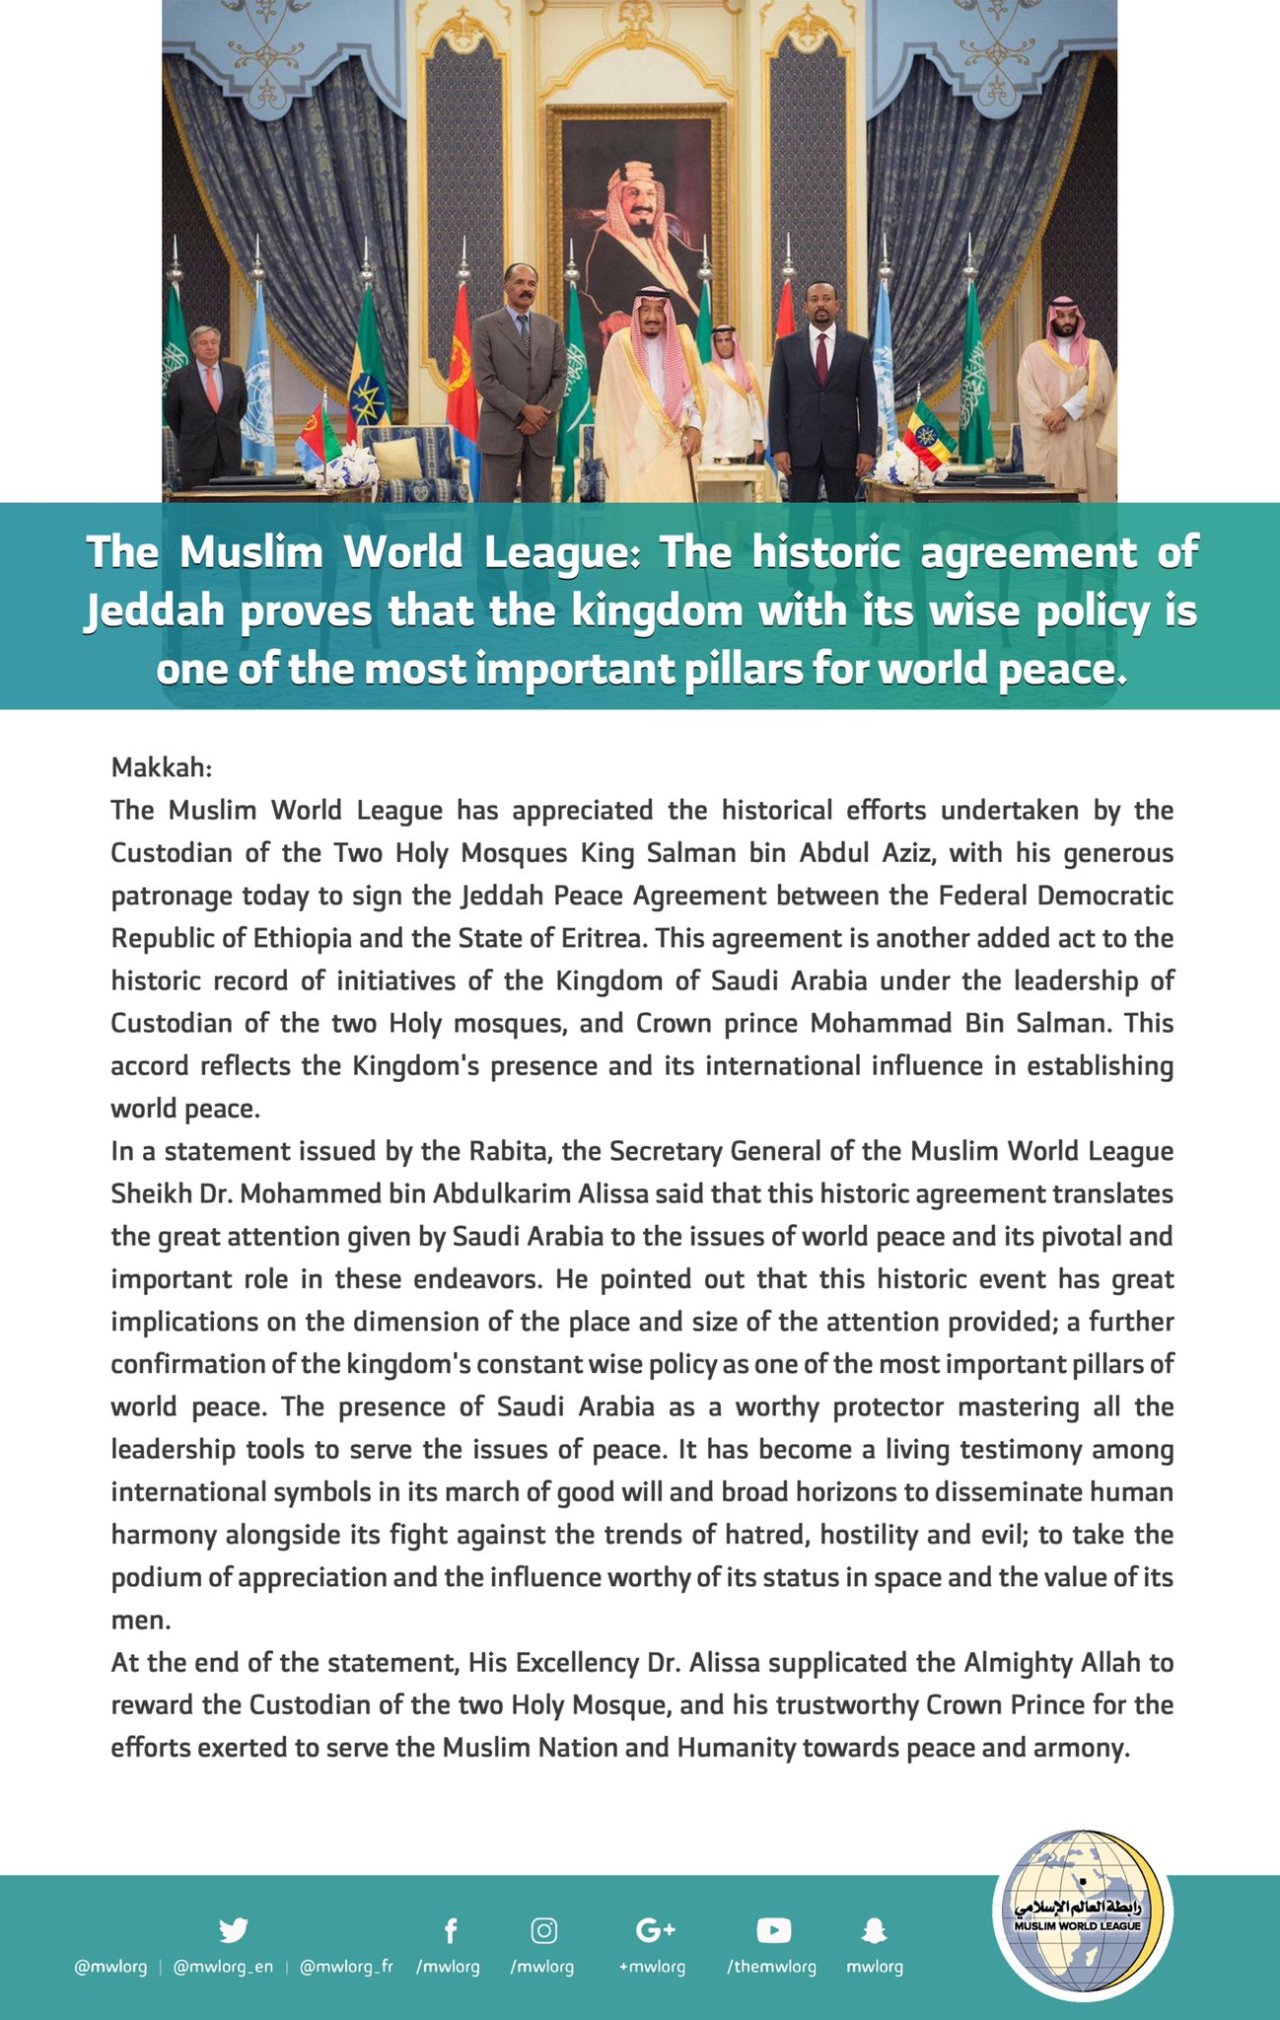 MWL: The Jeddah historic agreement proves that the kingdom with its wise policy is one of the most important pillars for world peace